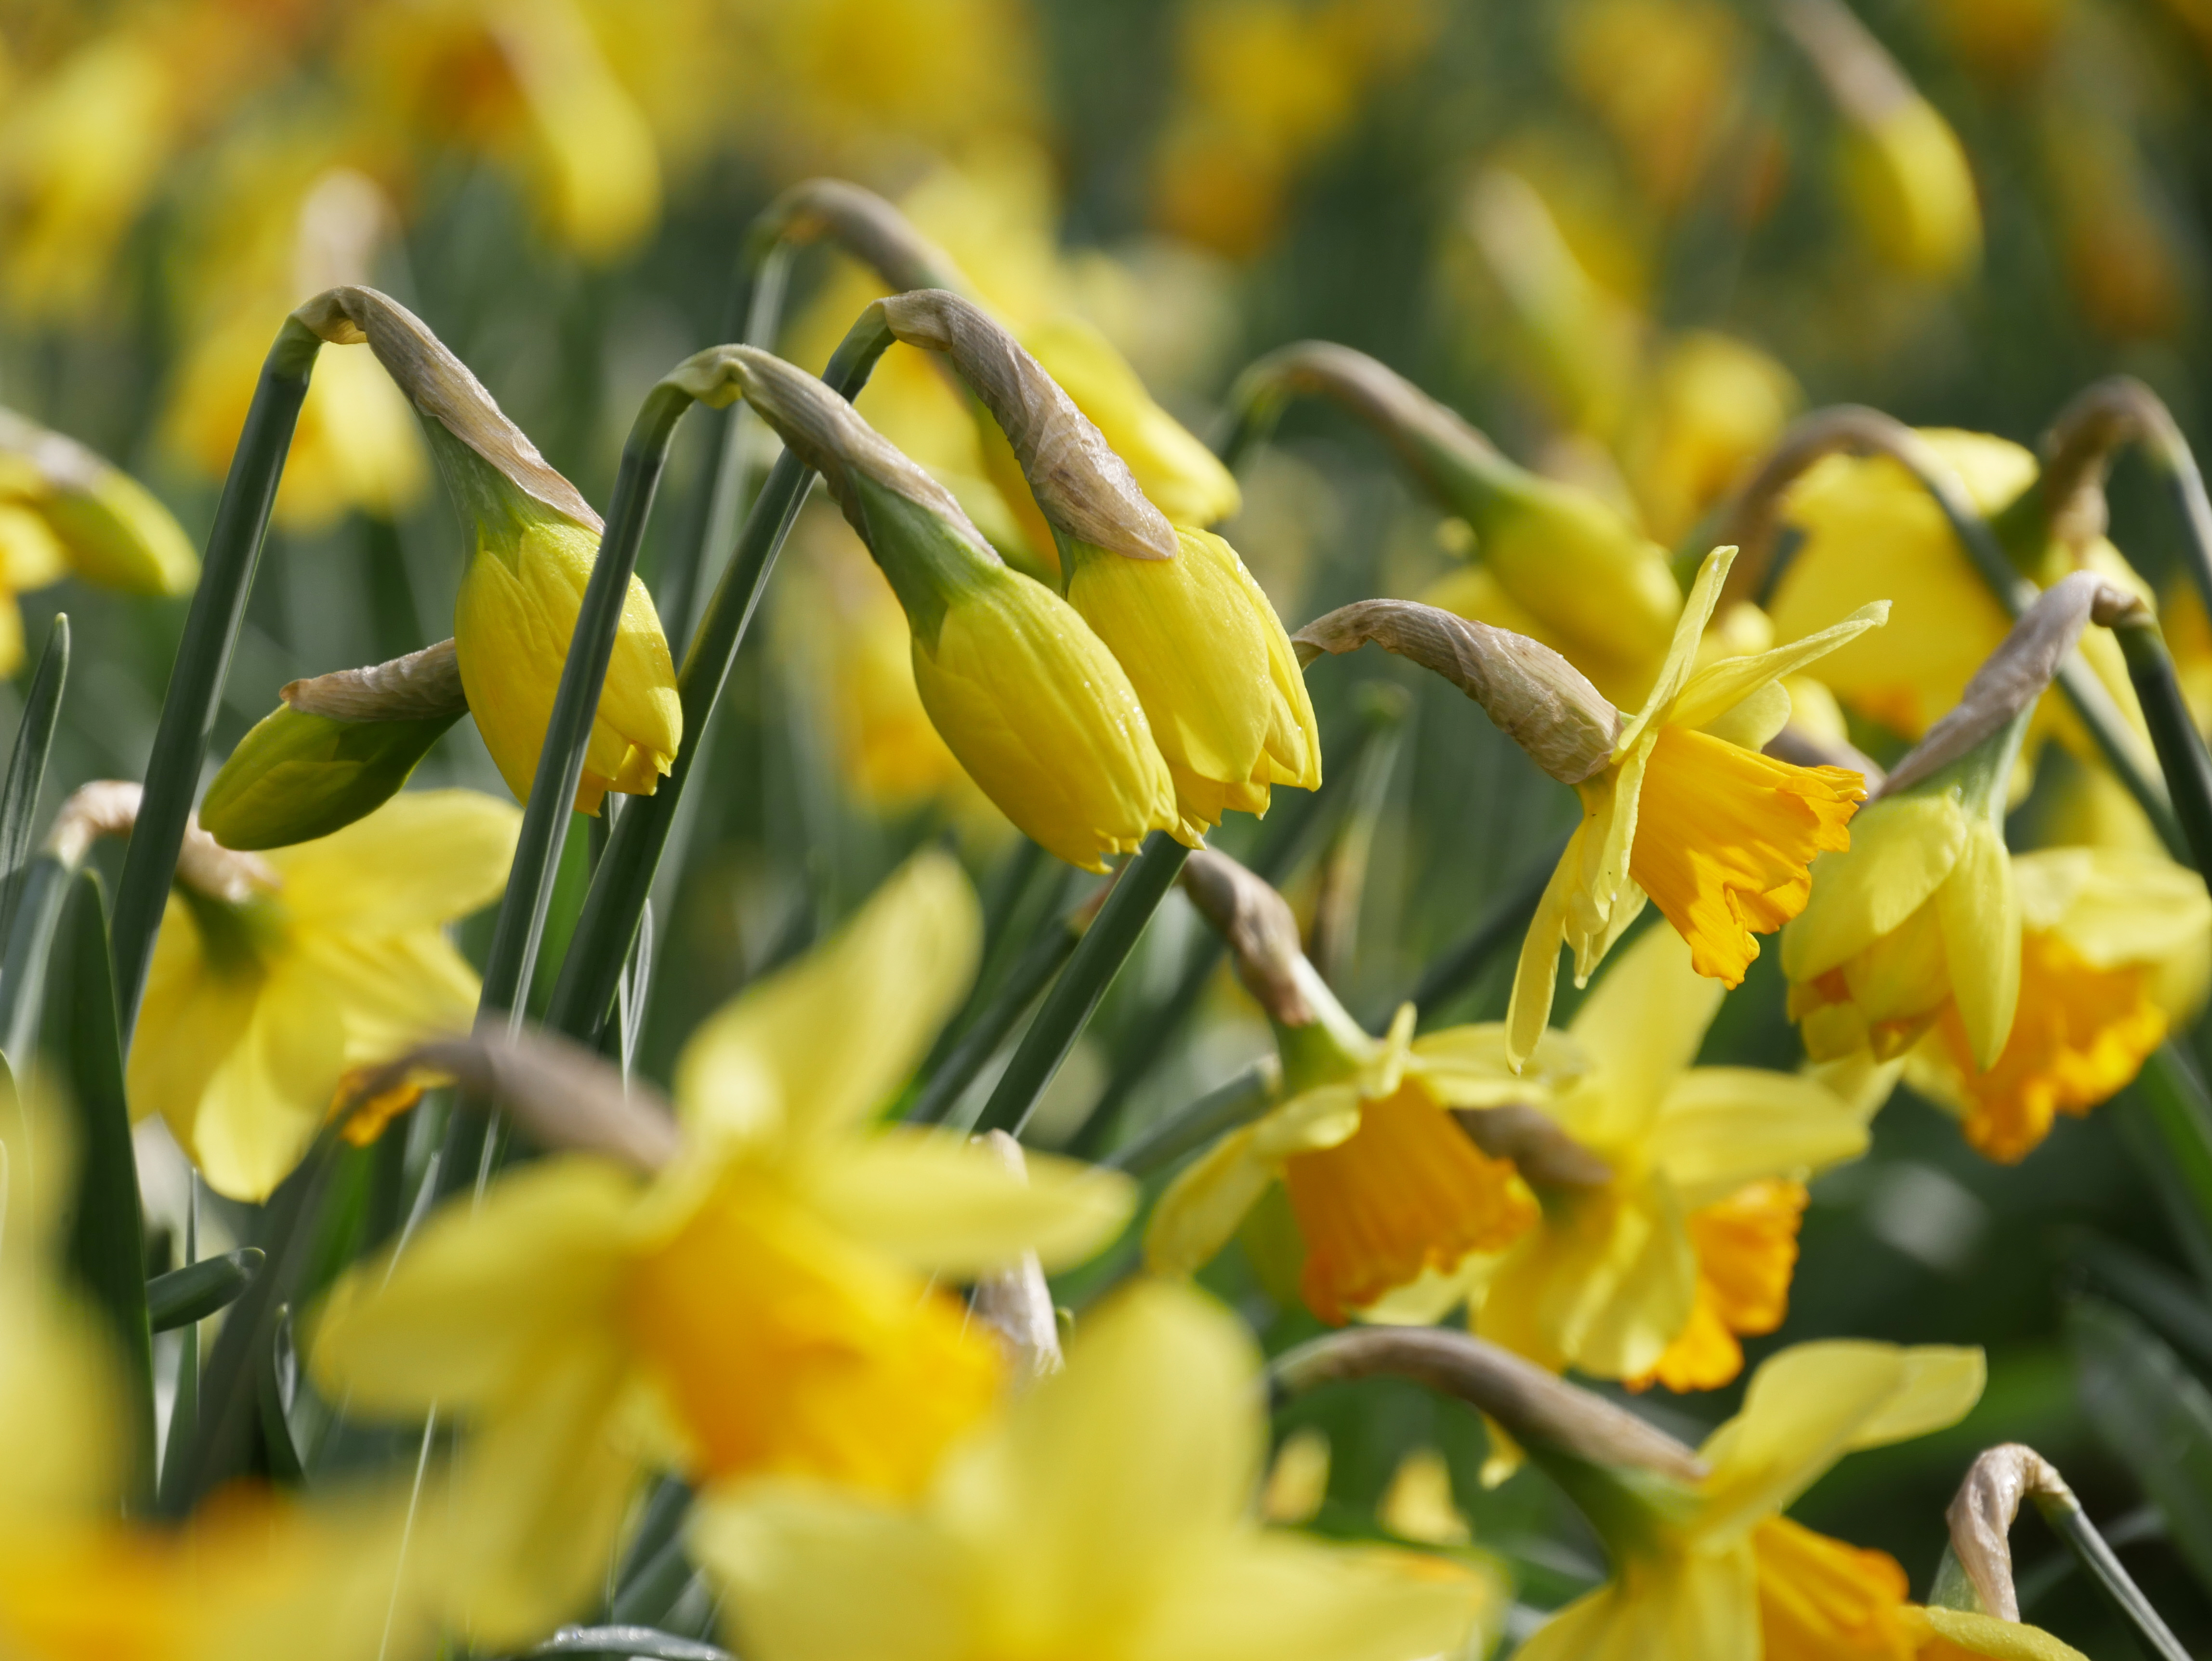 Entrants to the diary are following in the footsteps of writers such as Dorothy Wordsworth who wrote about daffodils